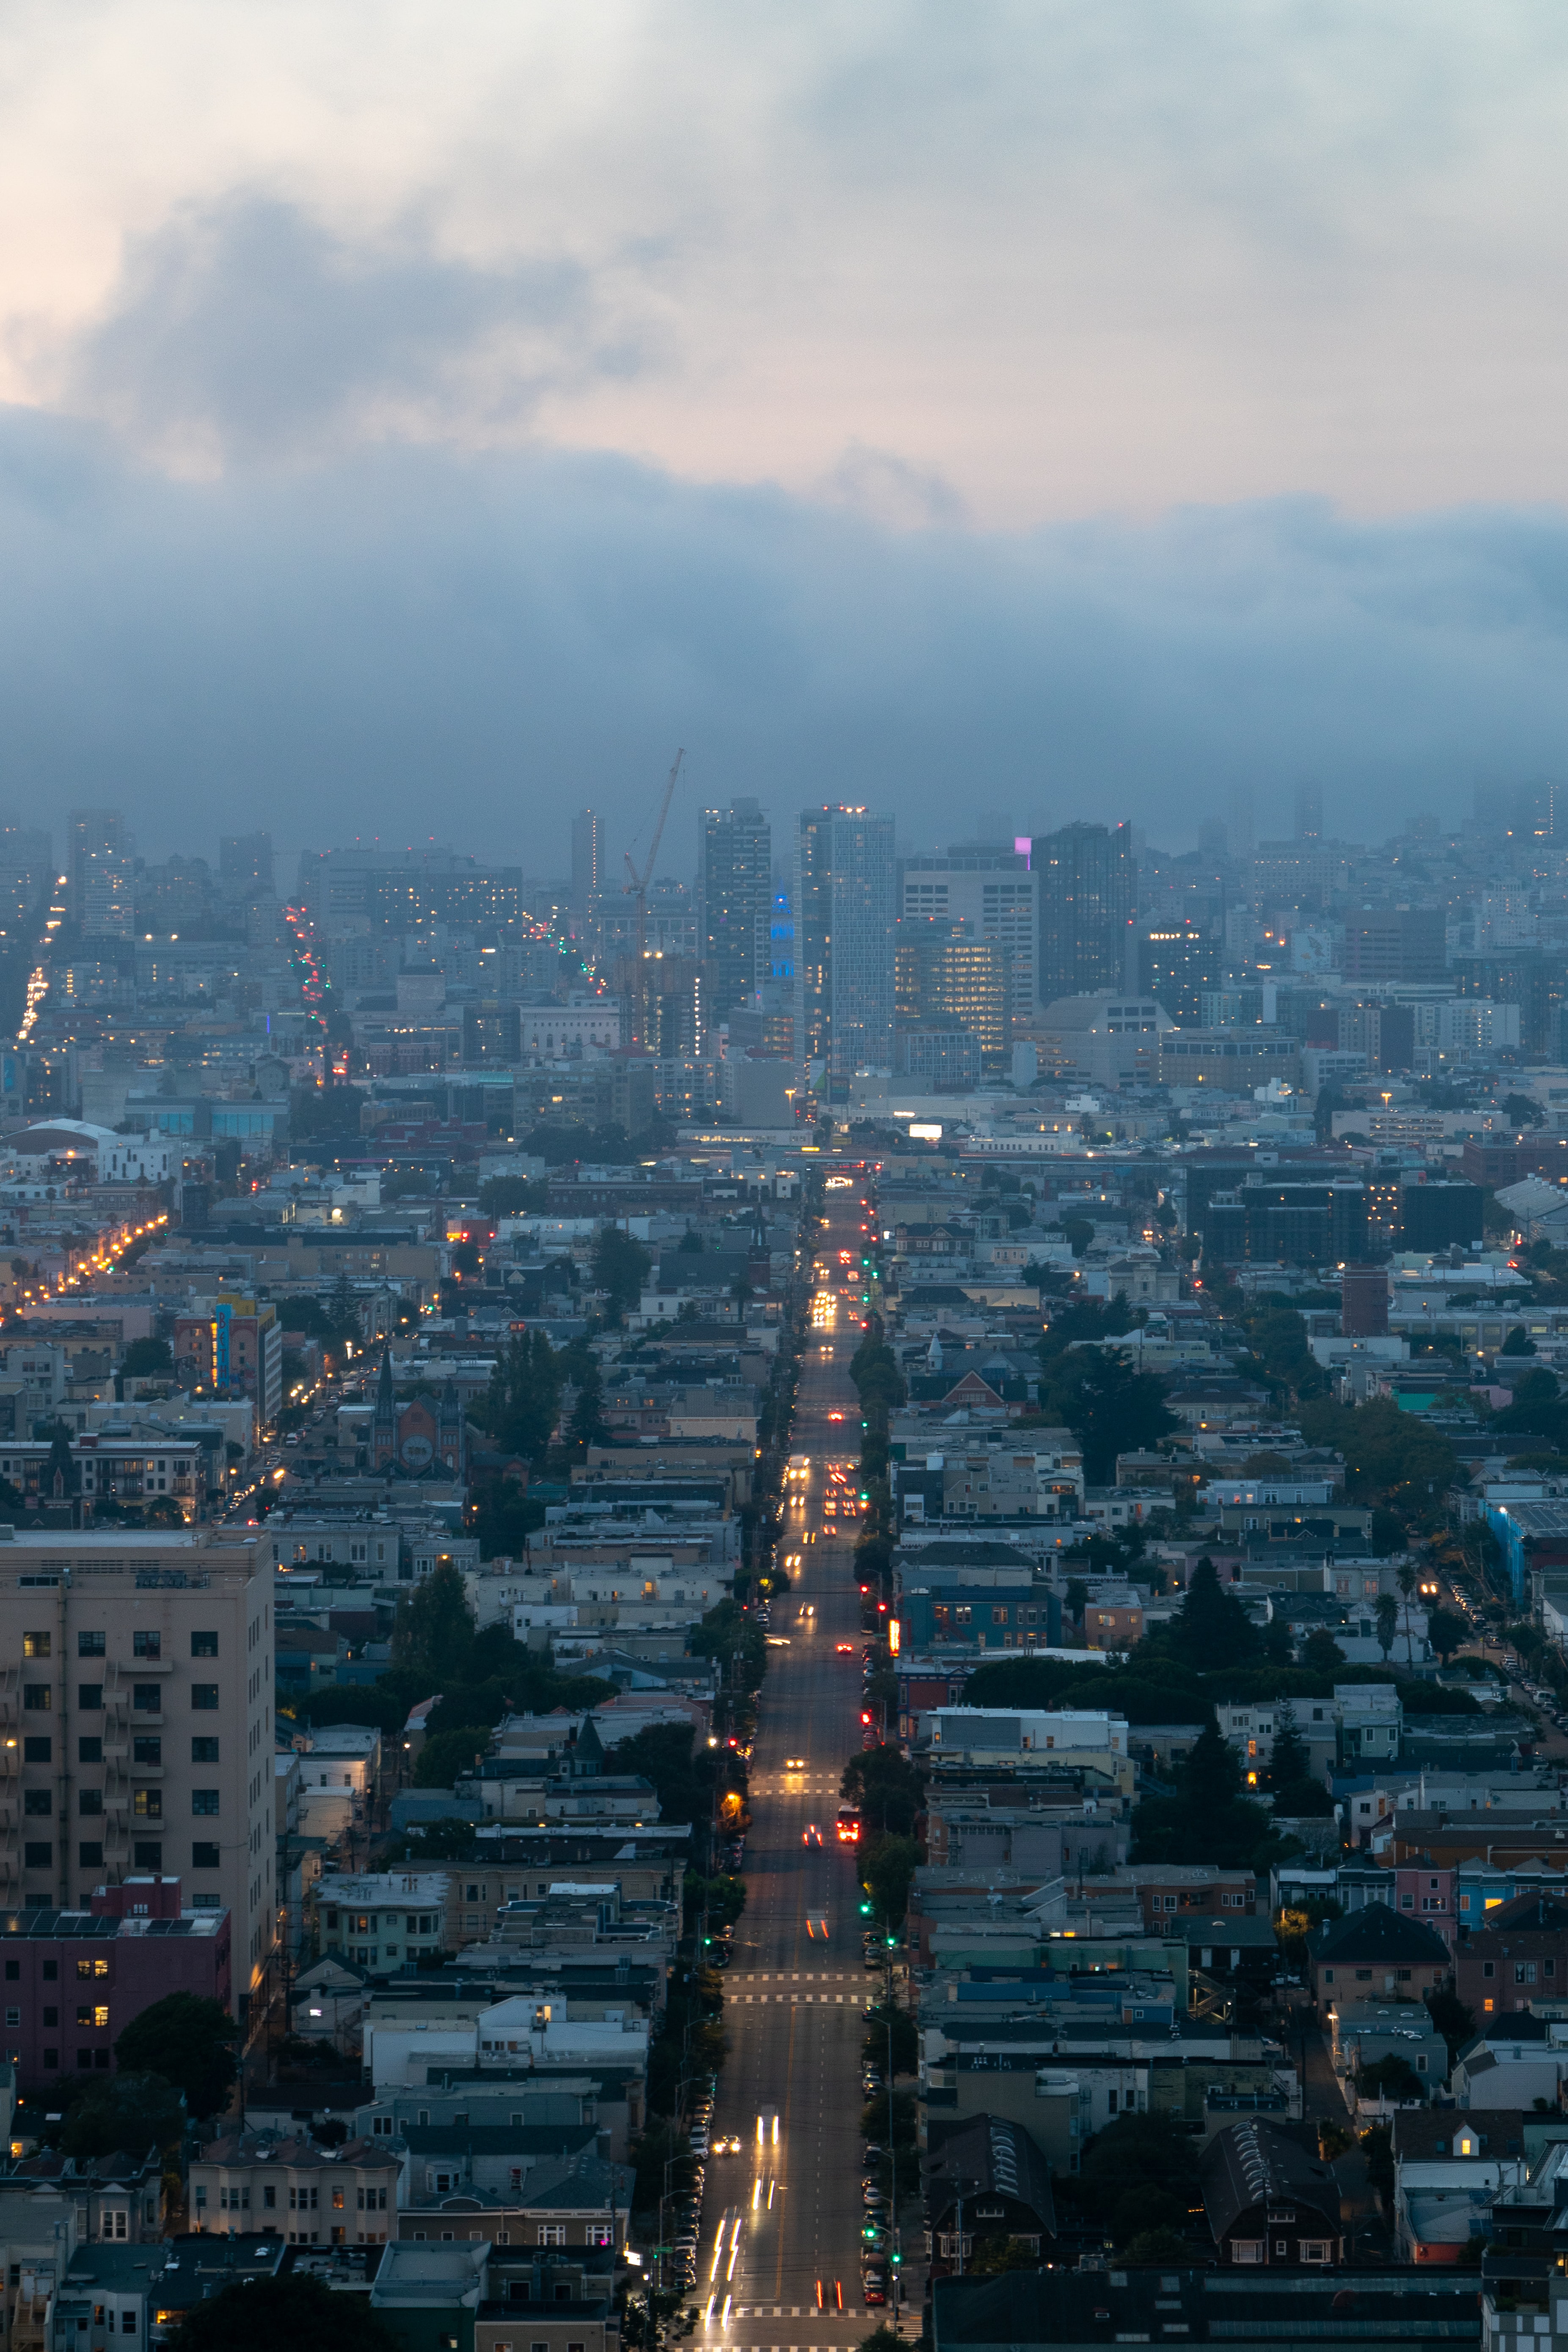 Windows Backgrounds street, cities, city, building, view from above, fog